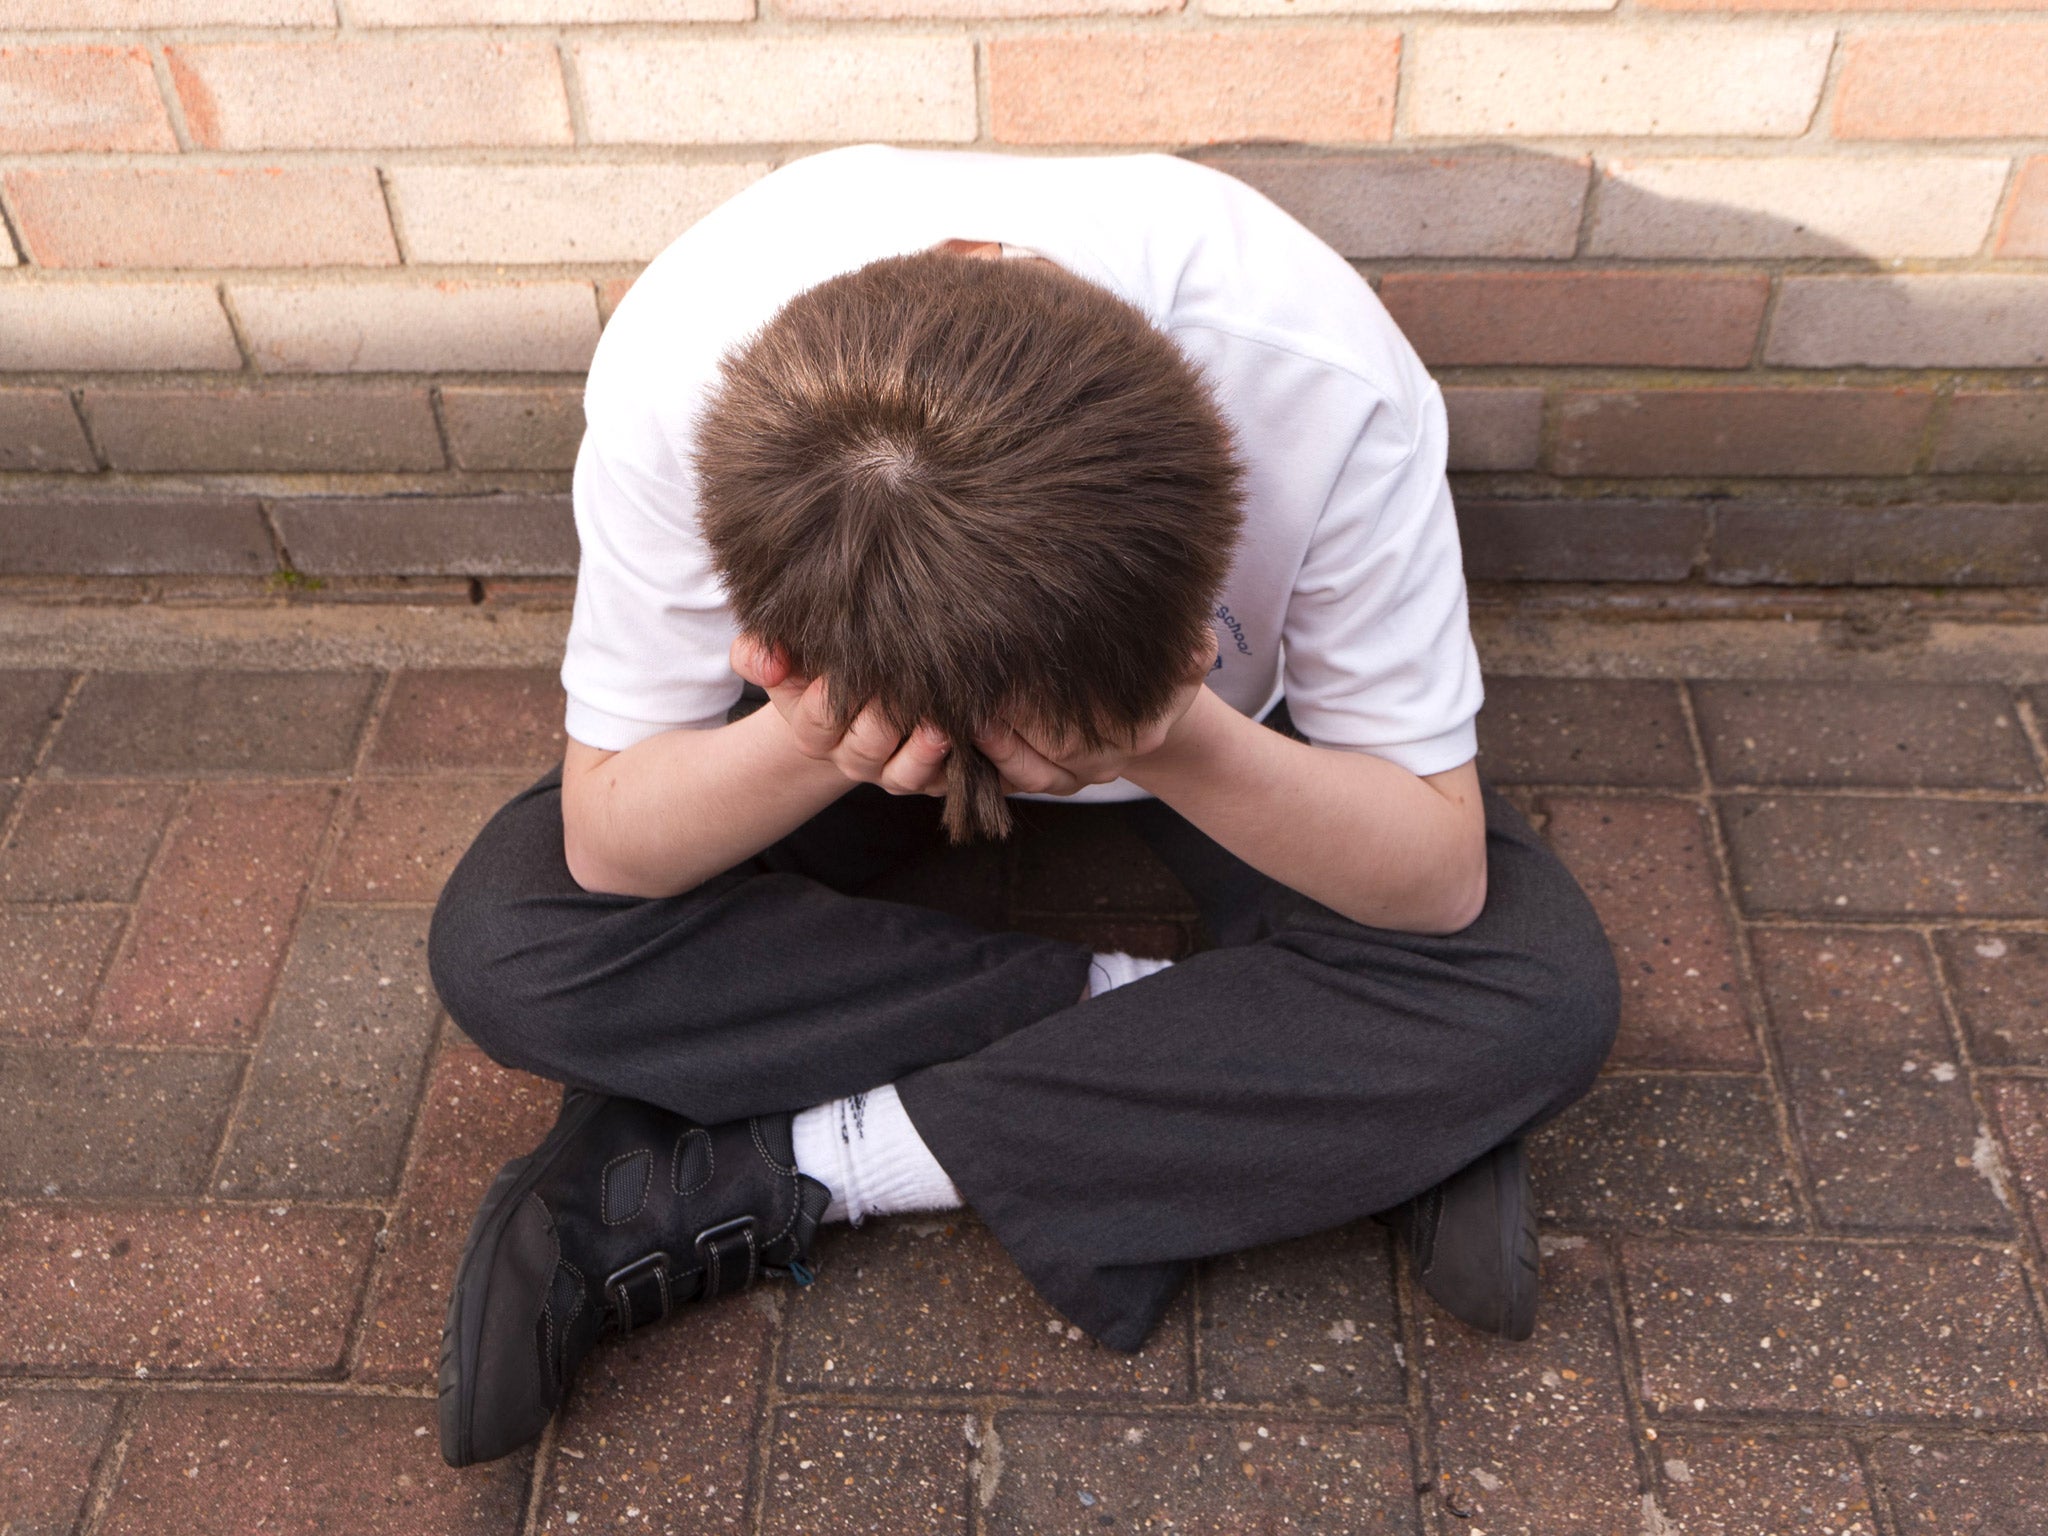 Childhood bullying can continue to damage mental and physical health for decades